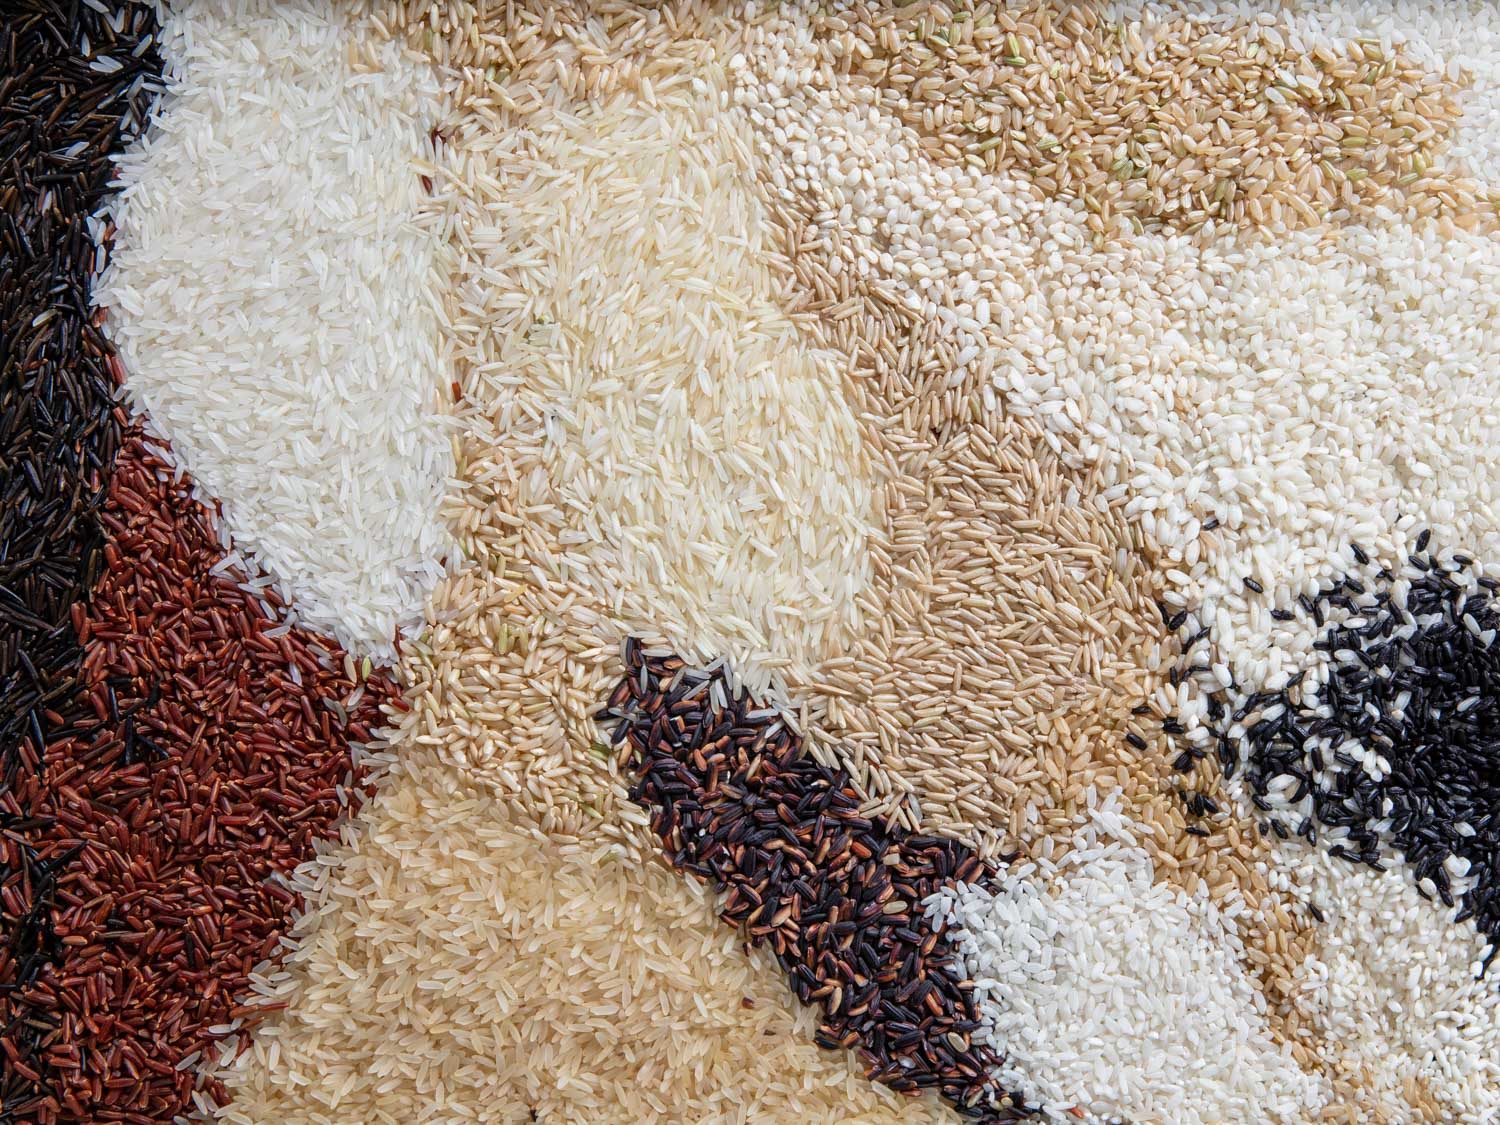 many different varieties of rice spread artfully on a surface